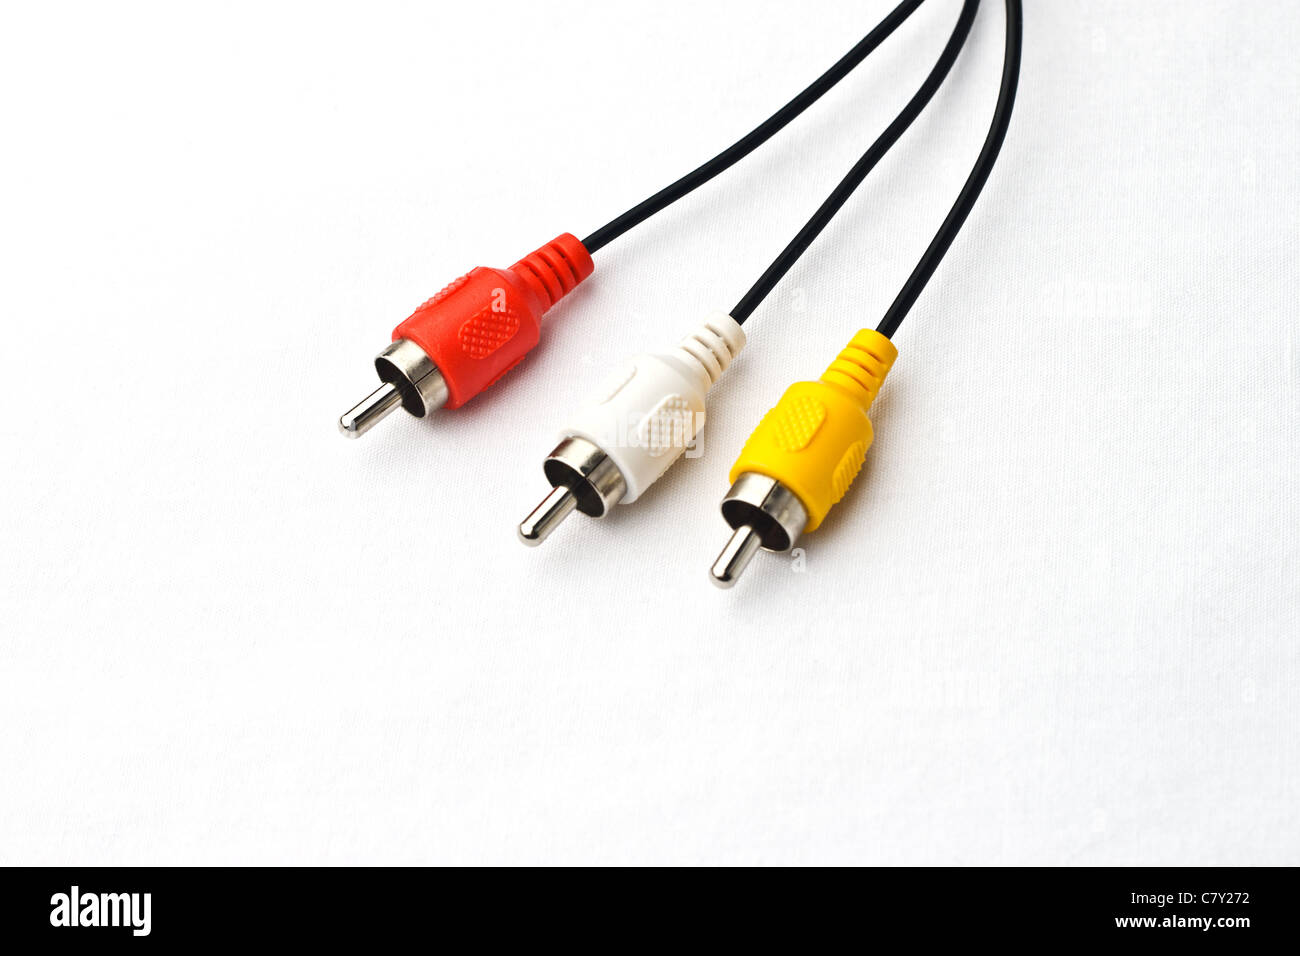 3 color av cable hanging down on faded white background Stock Photo